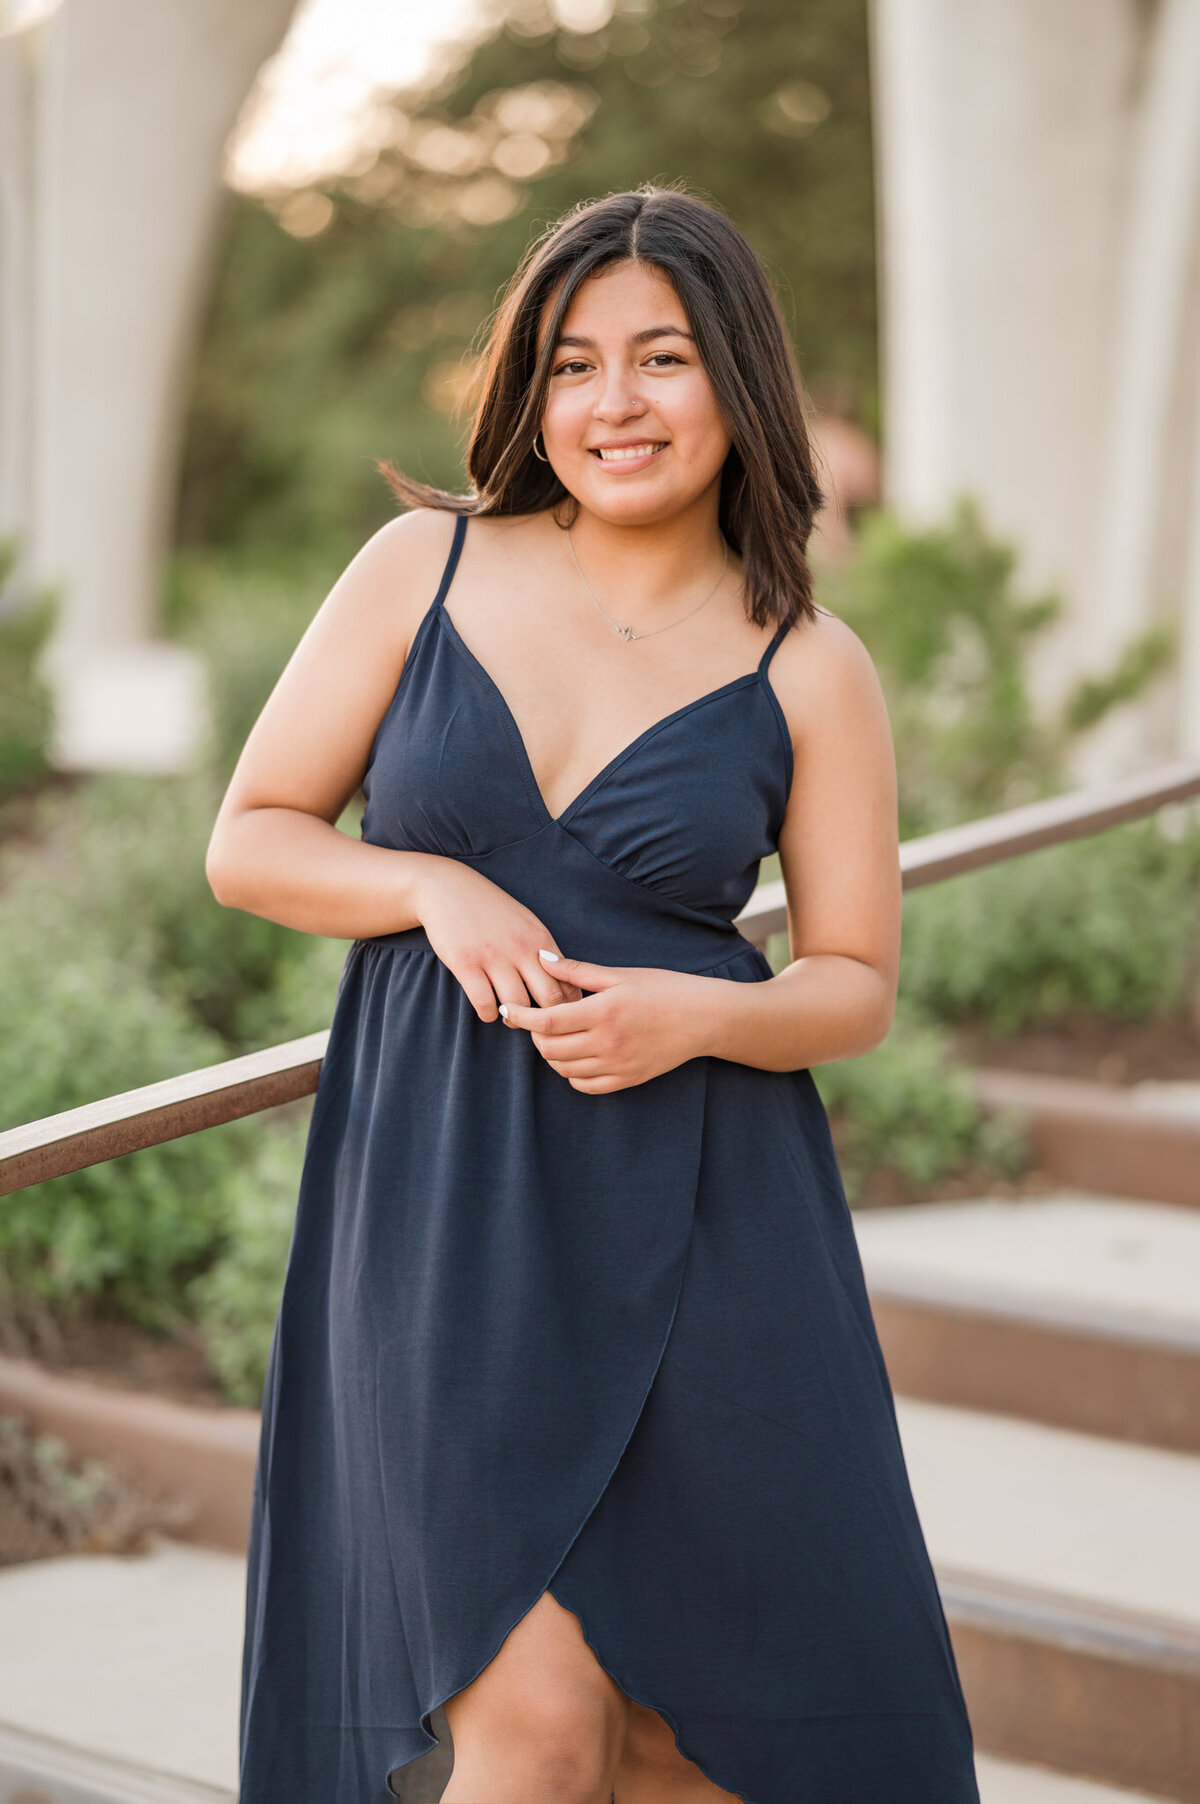 San Antonio senior girl poses for pictures in a blue dress  in golden hour light.